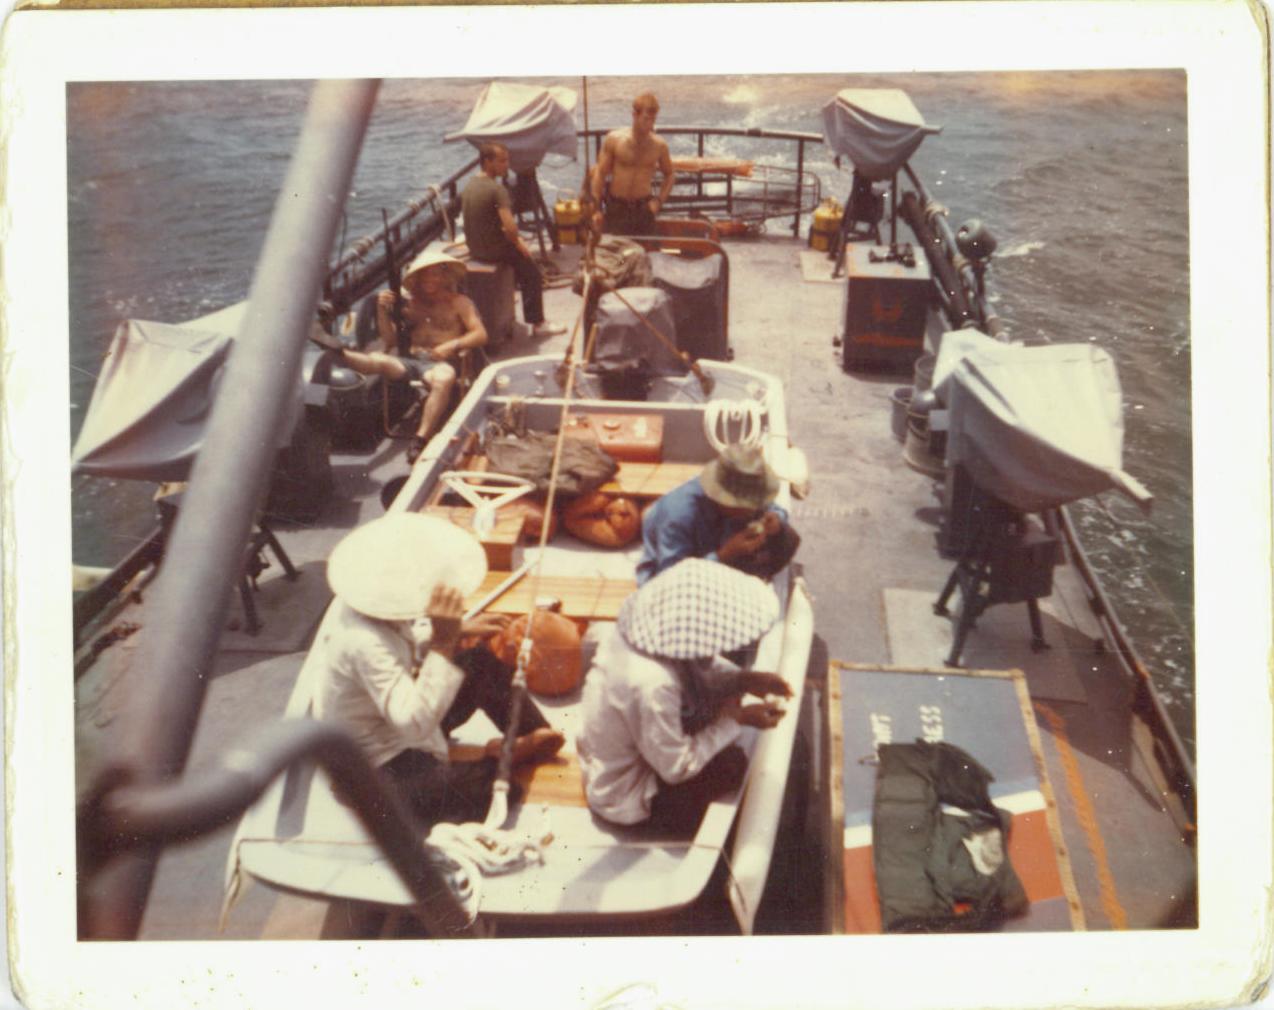 4)	Fantail of an 82-foot patrol boat with Vietcong detainees seated in the  Boston Whaler-style smallboat. (Courtesy of Gordon M. Gillies)